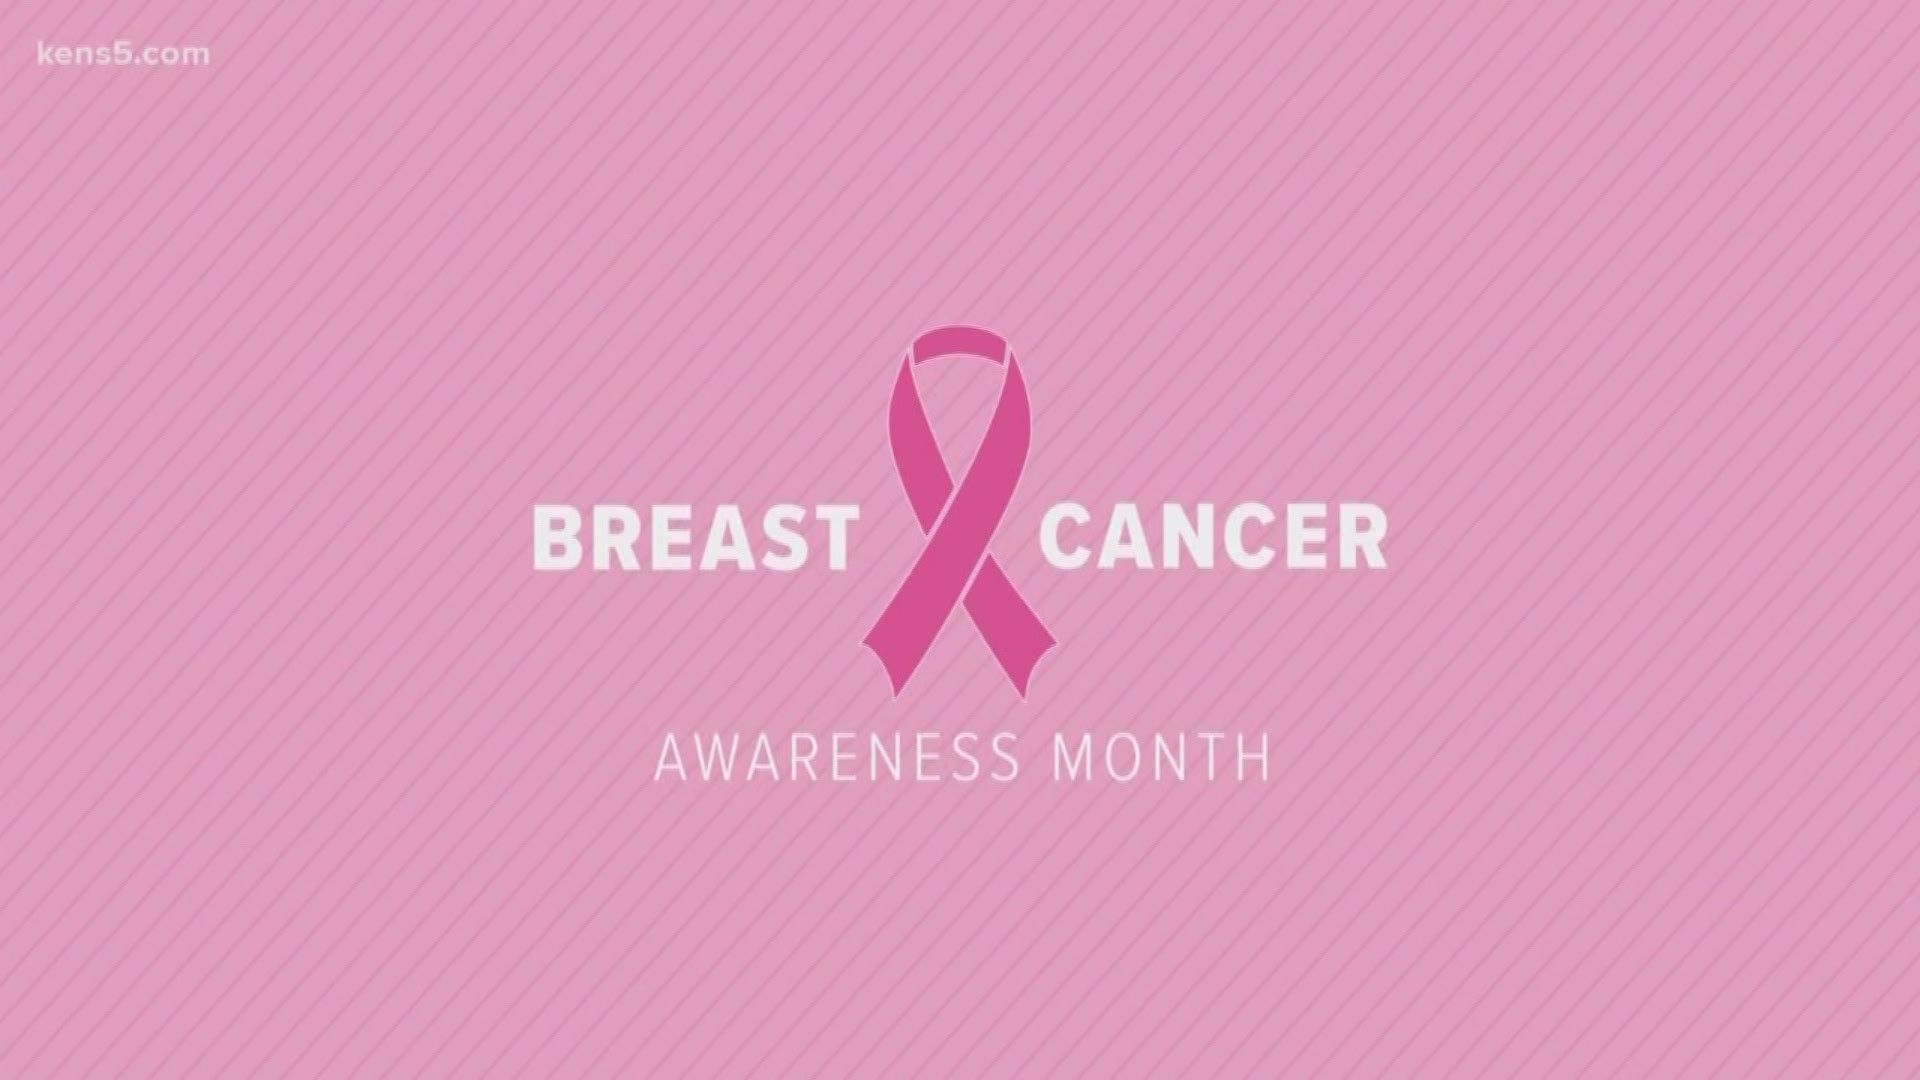 How Free Screenings Could Save Lives. Breast Cancer Awareness Month